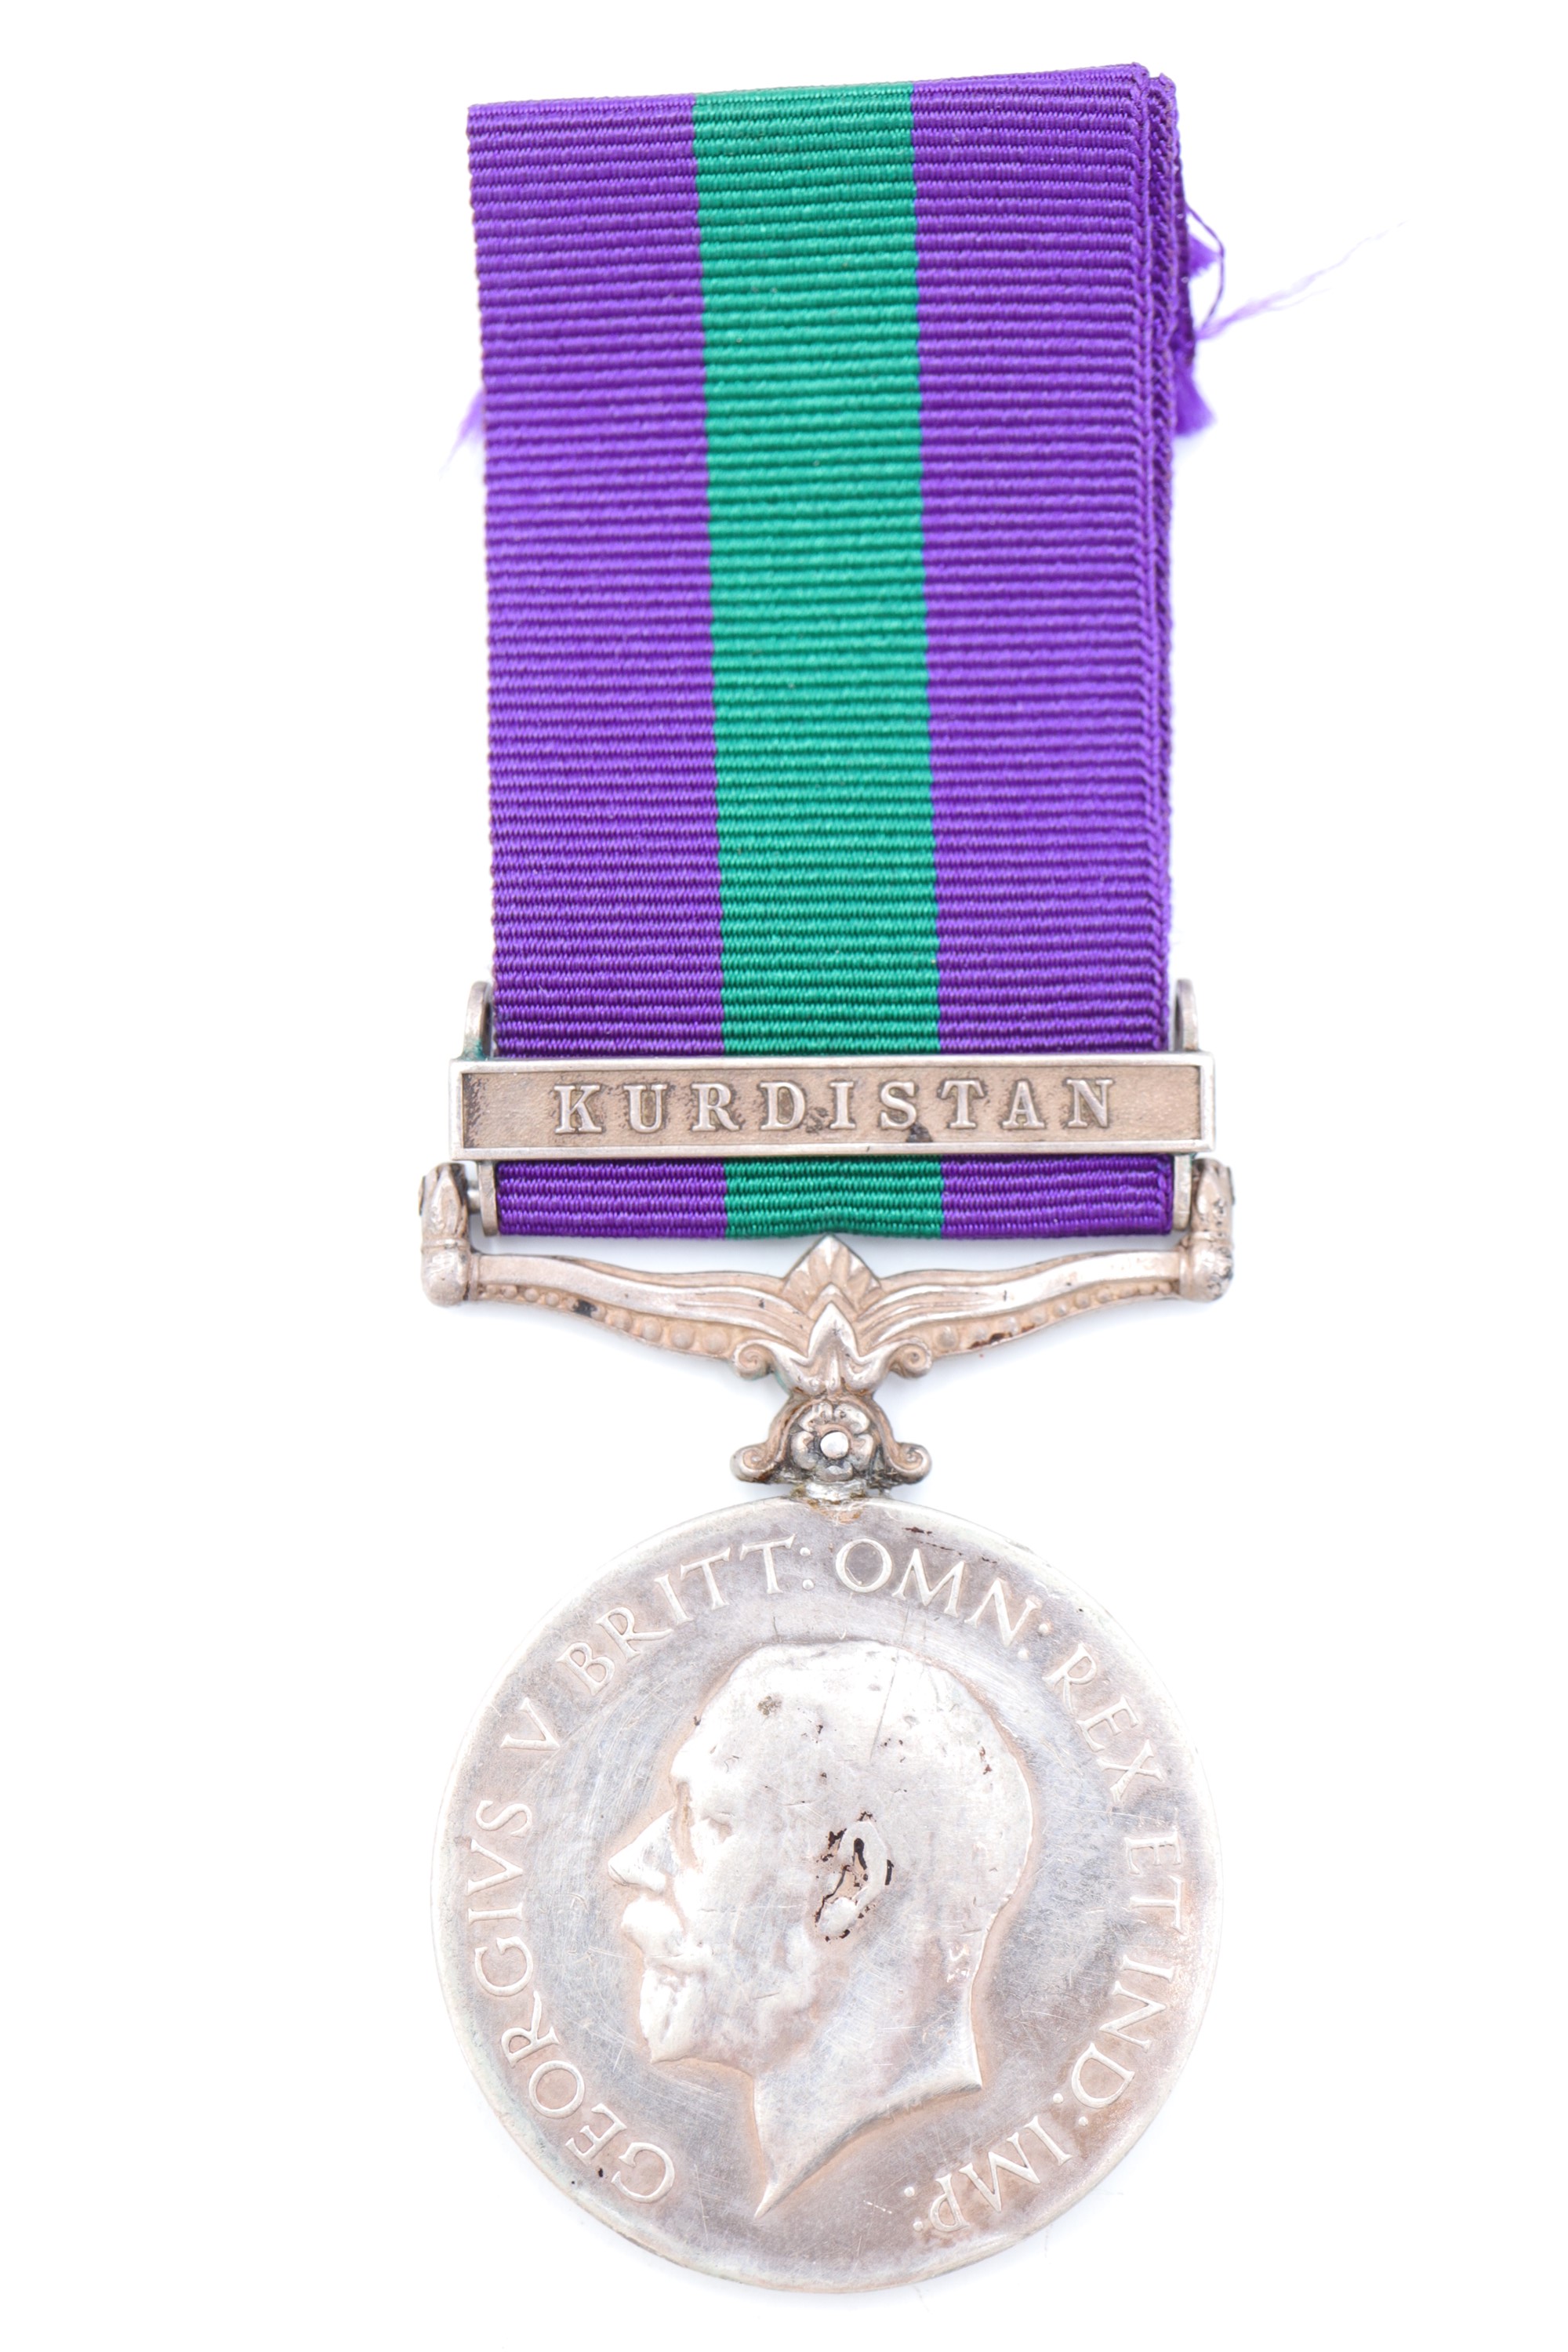 A General Service Medal with Kurdistan clasp to 3237673 Pte A L Urry, Cameronians - Image 2 of 7